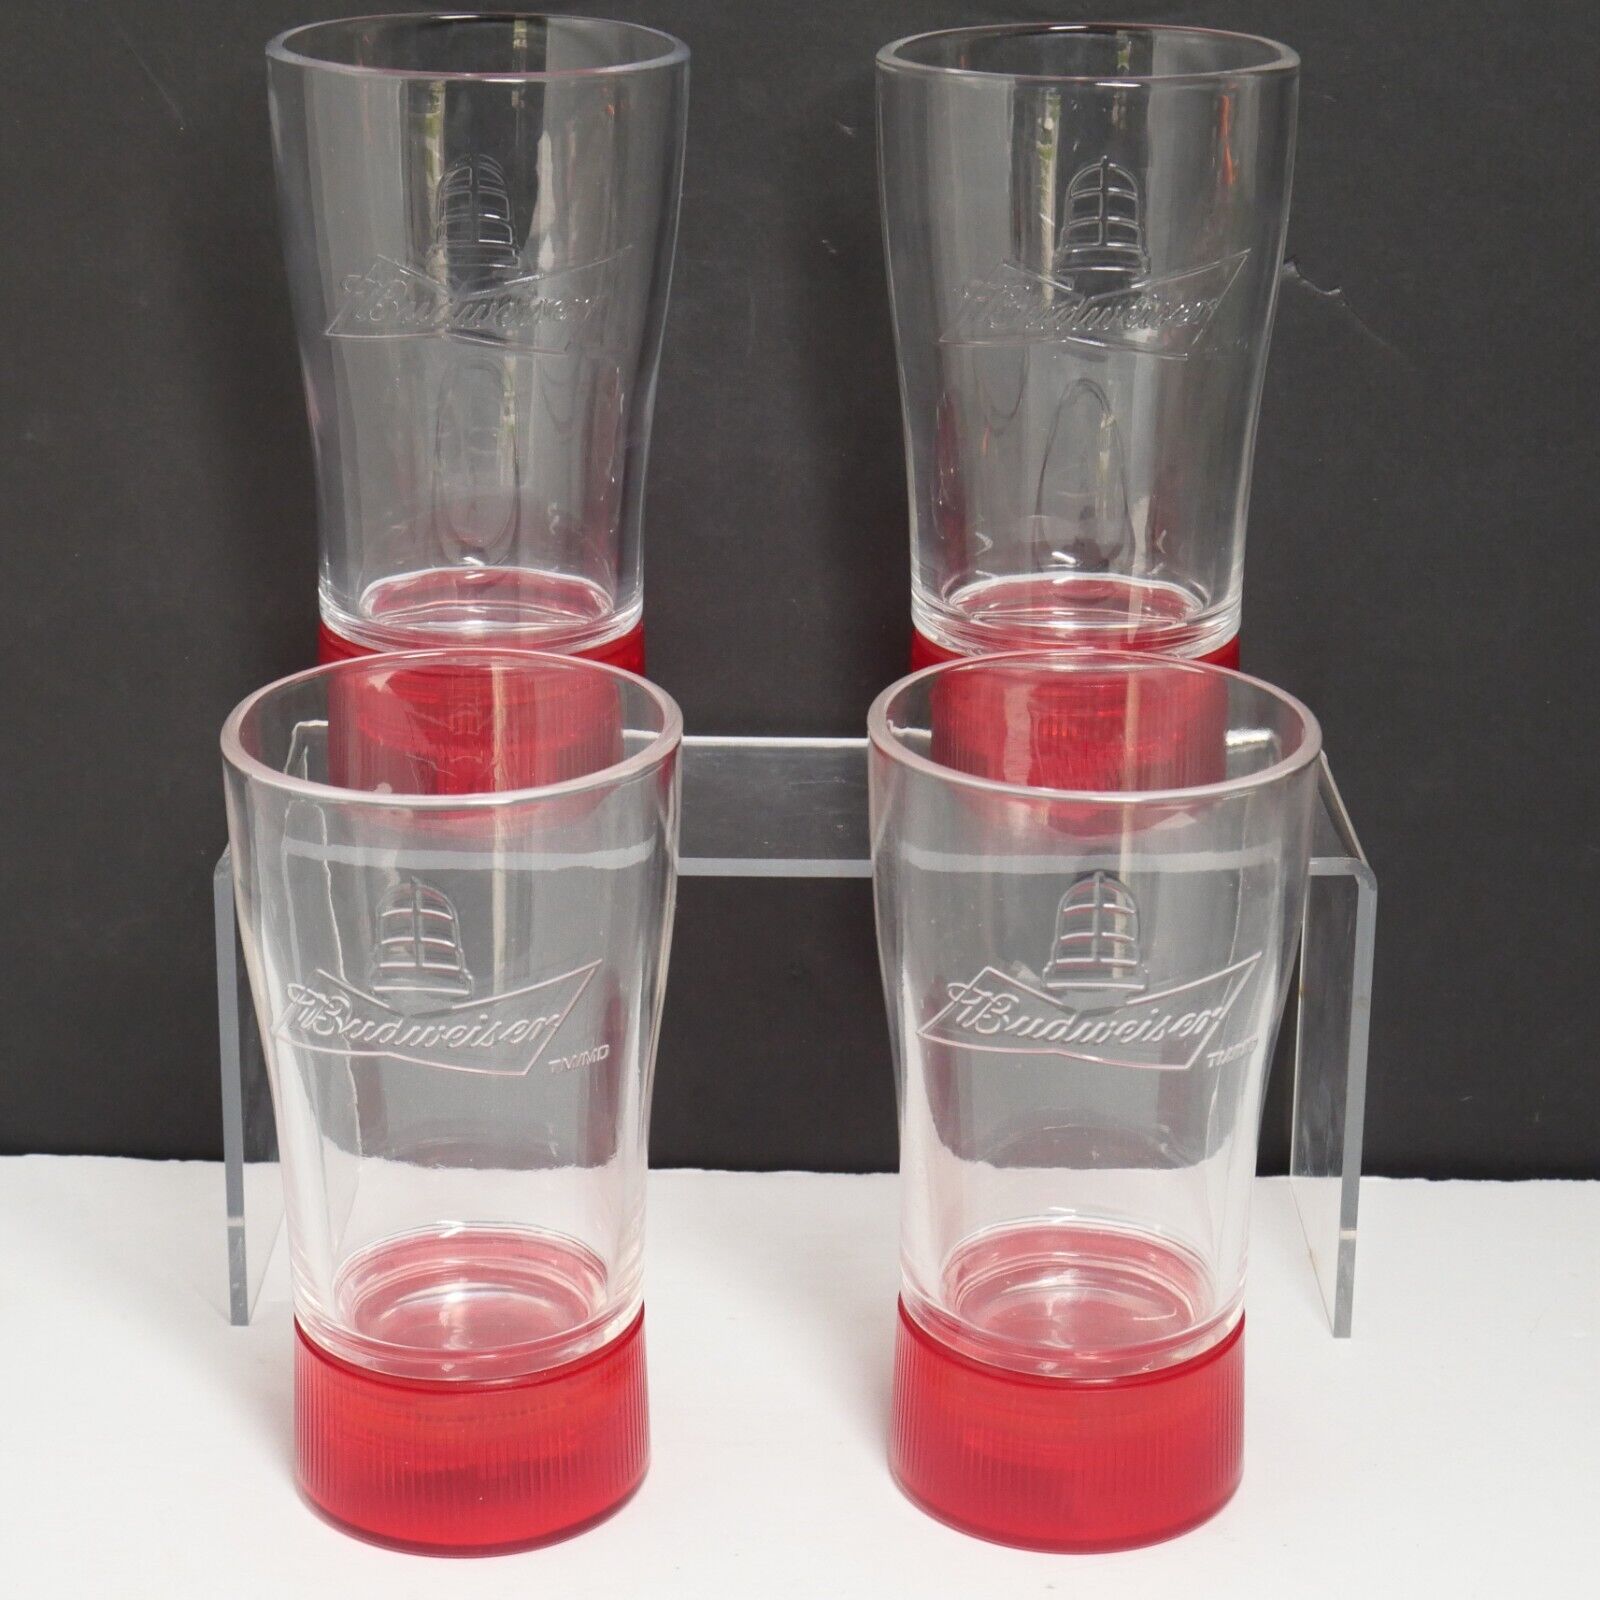 4X Budweiser Red Light Up Goal Synced Glasses NHL Sync to Any Sport Team Tested